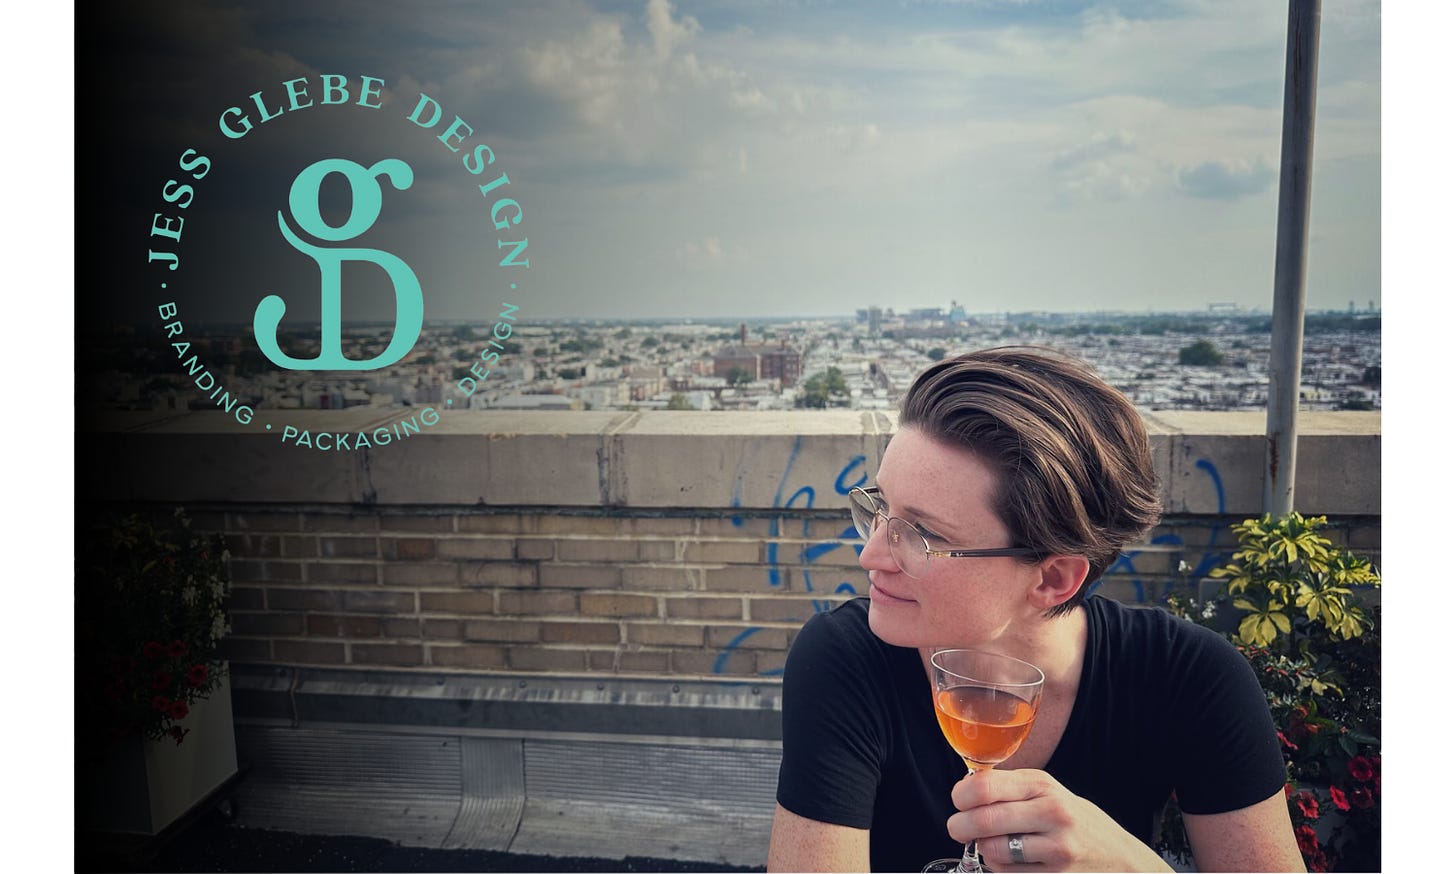 A woman drinks a glass of wine on a rooftop with the cityscape spanning out under a cloudy blue sky behind her.